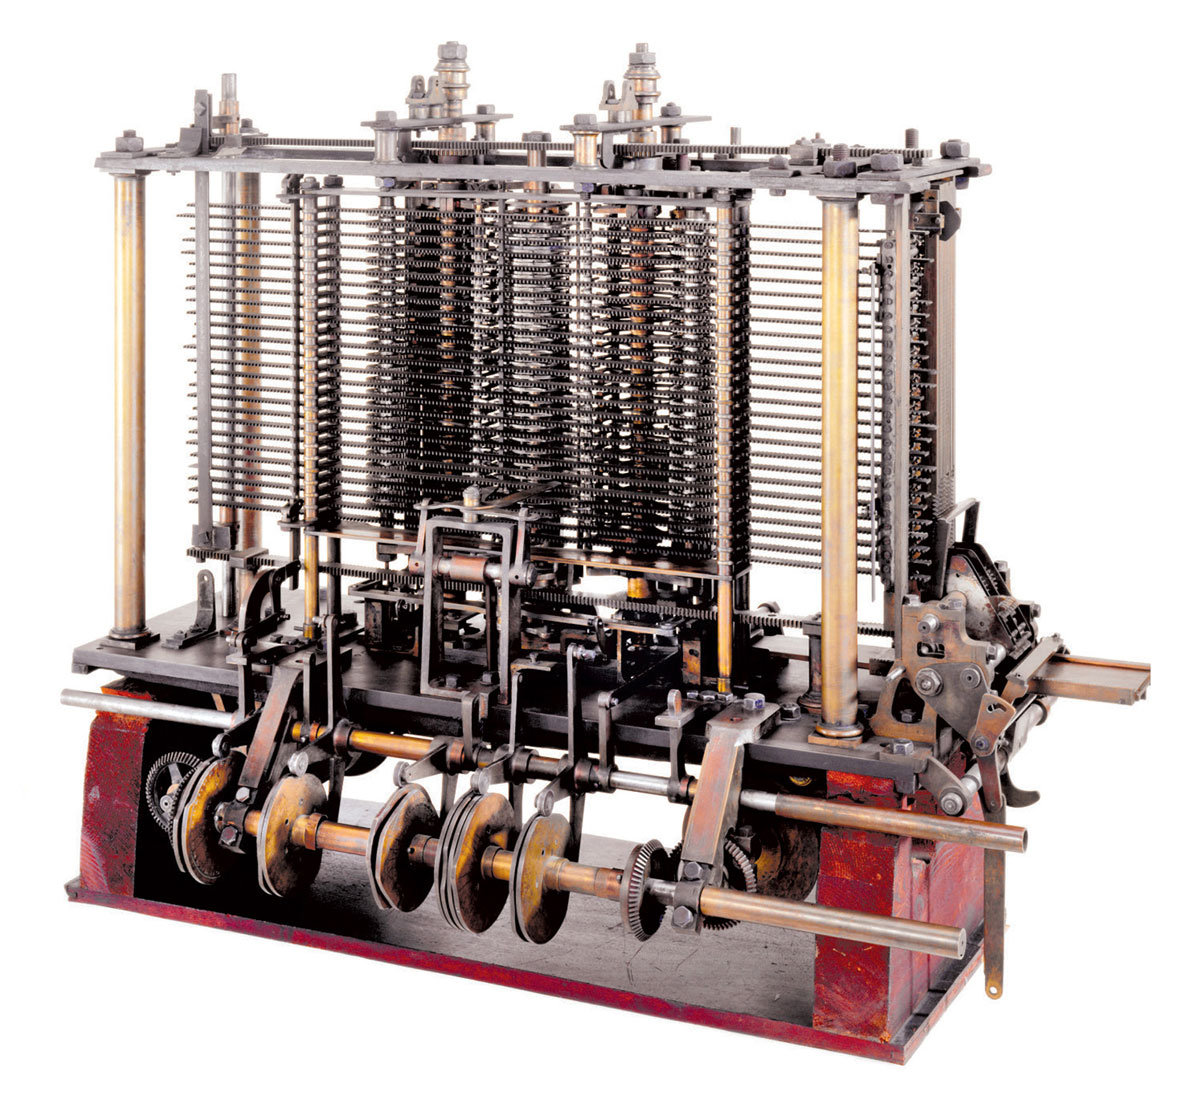 Analytical engine and difference engine